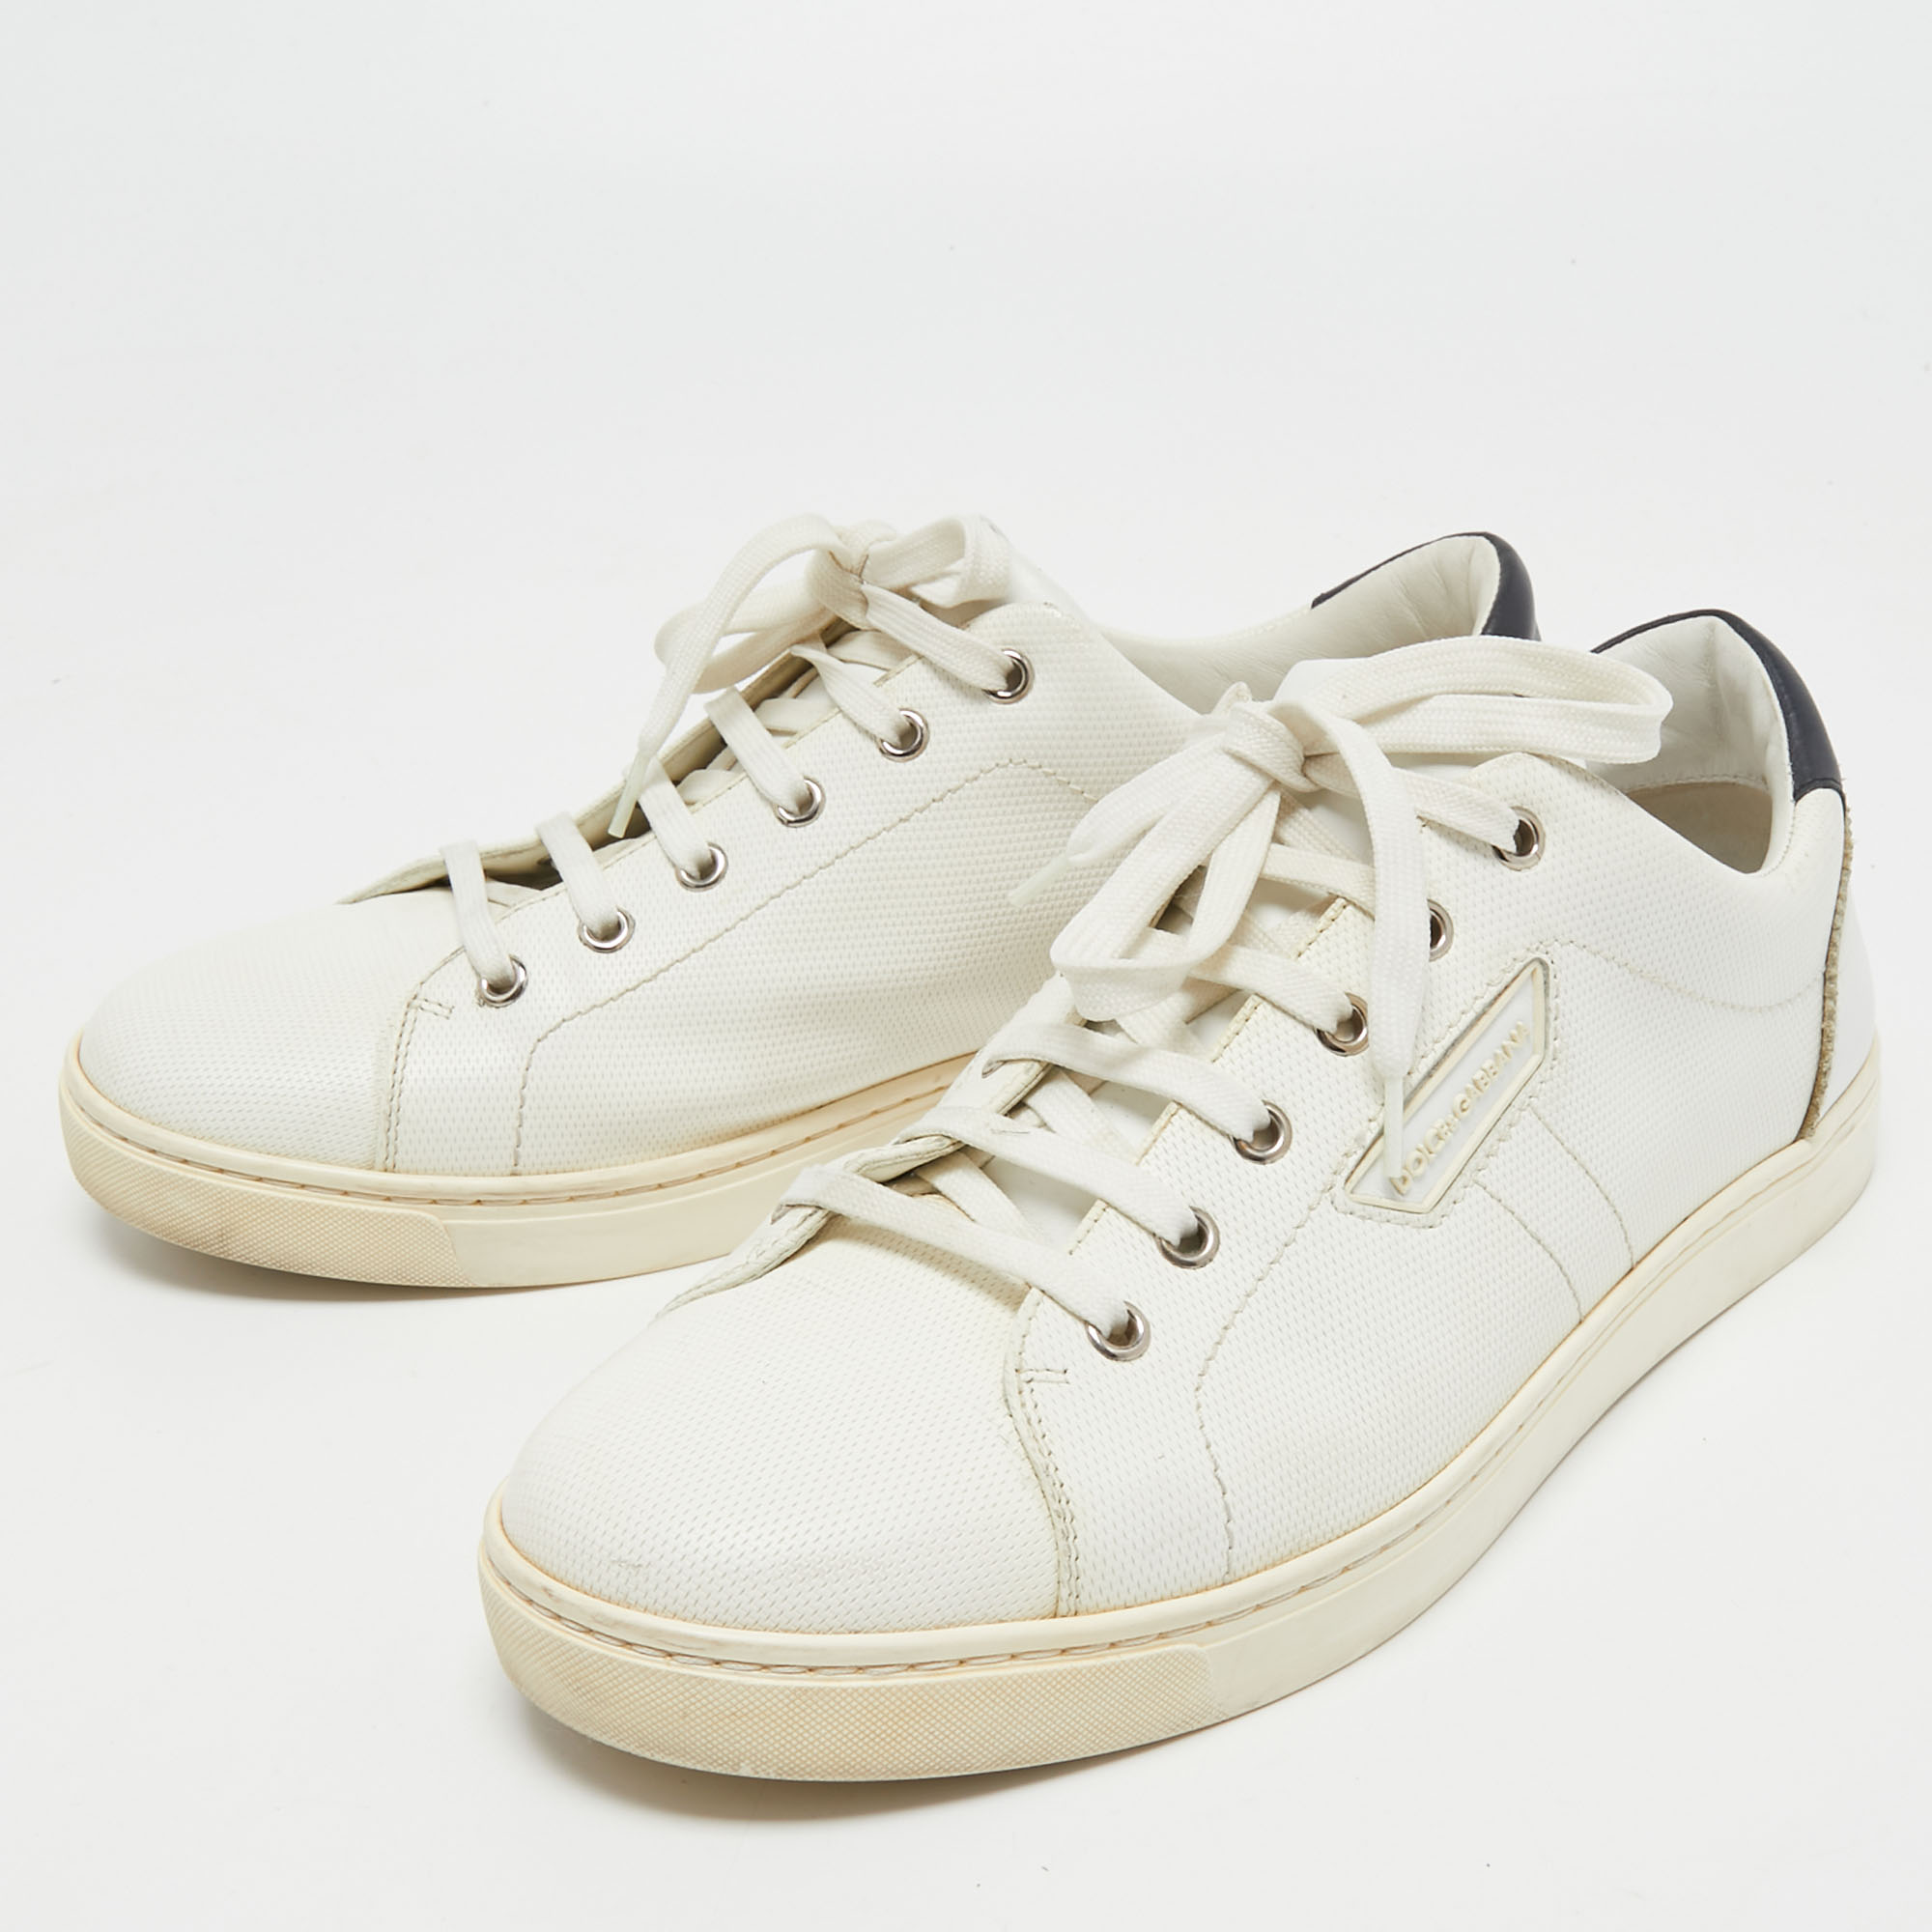 

Dolce & Gabbana White Textured Leather Low Top Sneakers Size